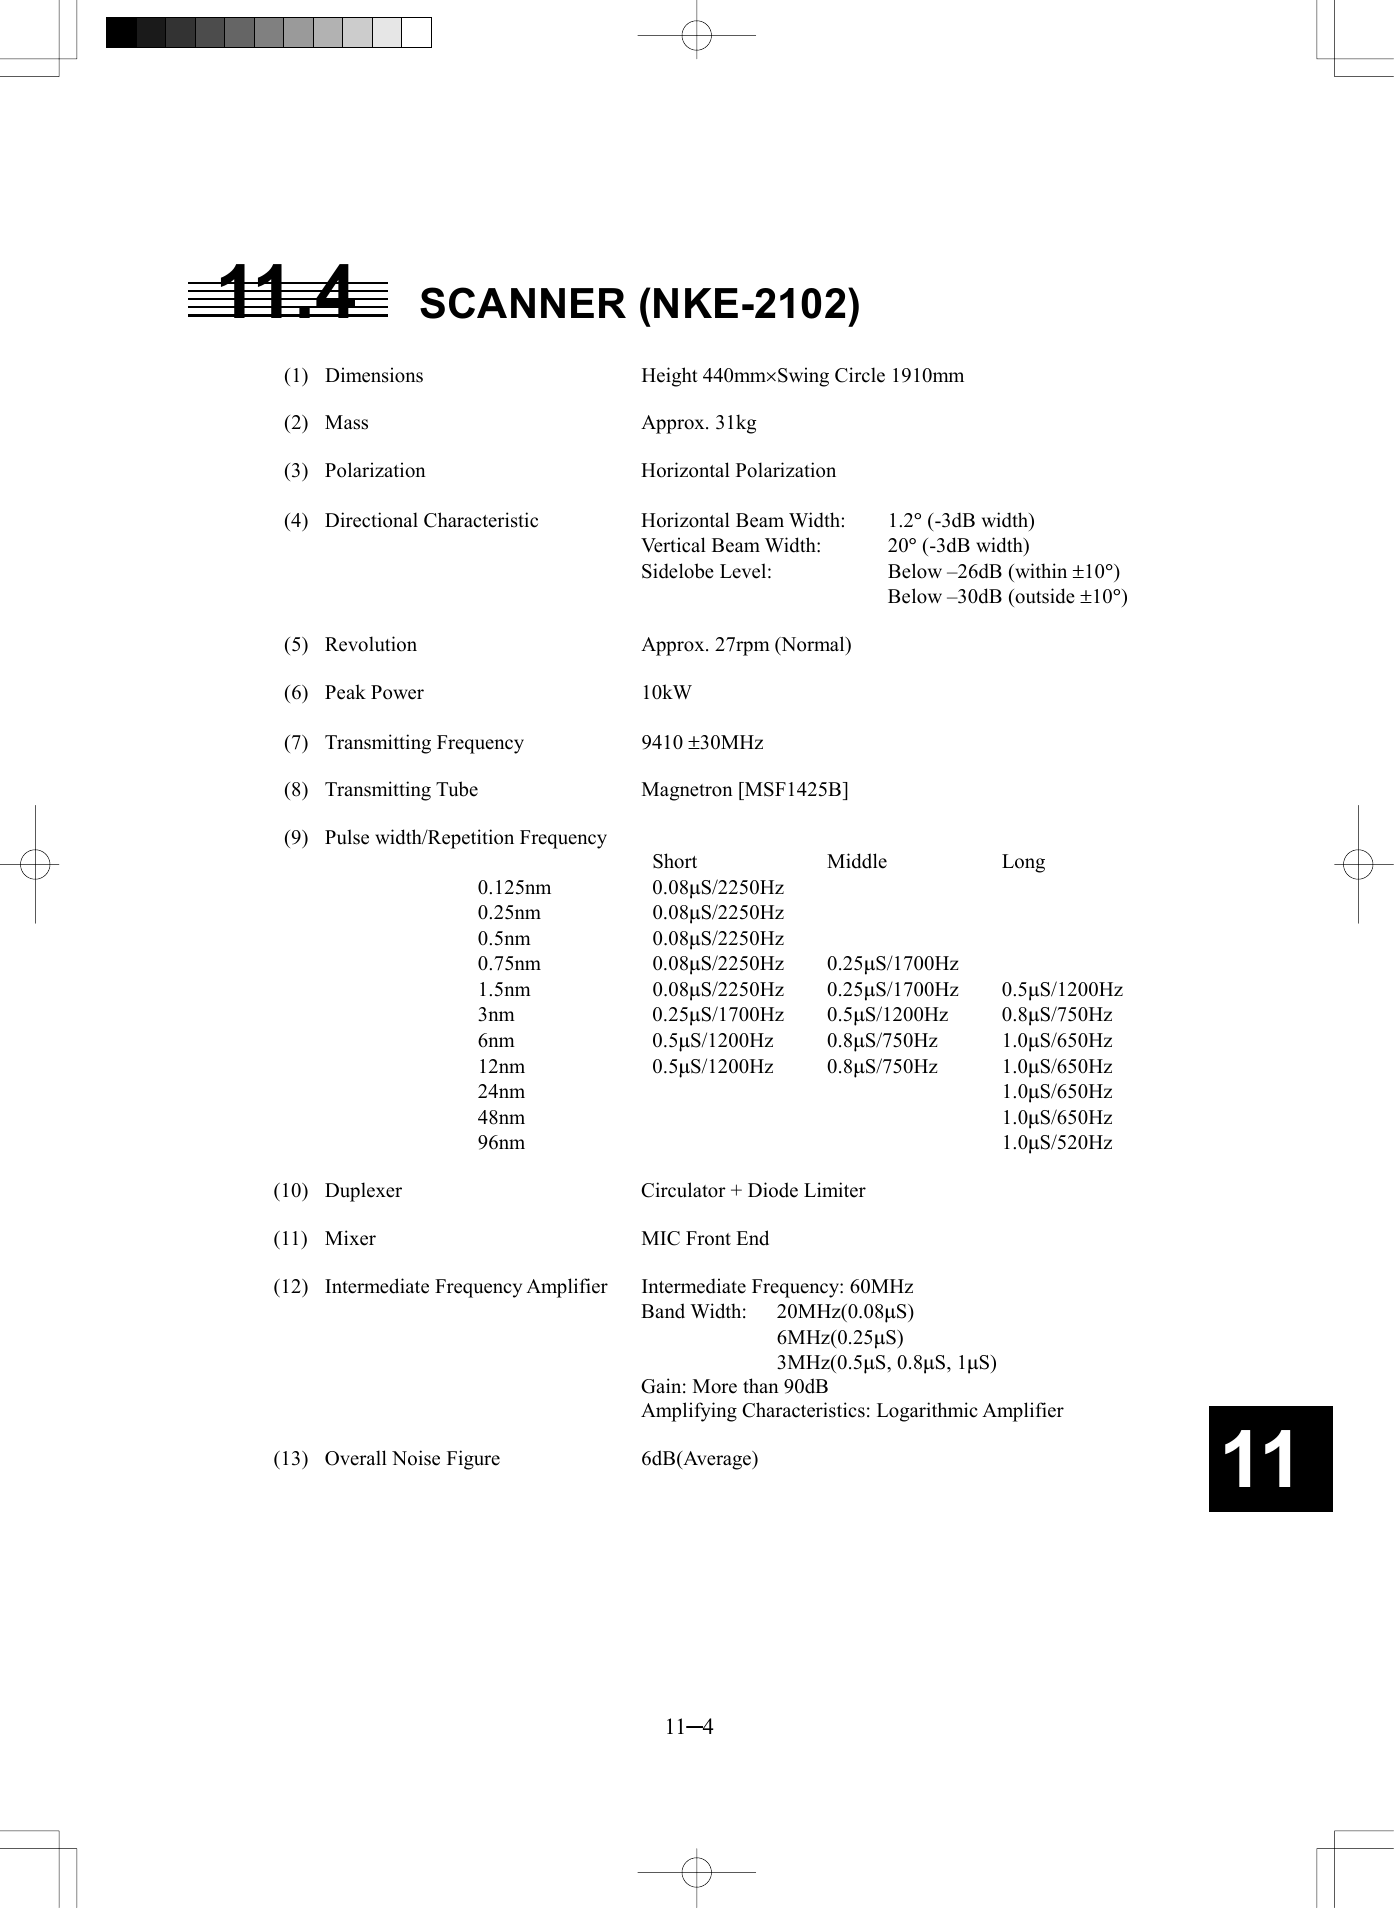   11─4 11 11.4 SCANNER (NKE-2102)   (1)  Dimensions  Height 440mm´Swing Circle 1910mm   (2)  Mass  Approx. 31kg   (3)  Polarization  Horizontal Polarization   (4)  Directional Characteristic  Horizontal Beam Width:  1.2° (-3dB width)    Vertical Beam Width:  20° (-3dB width)     Sidelobe Level:  Below –26dB (within ±10°)       Below –30dB (outside ±10°)    (5)  Revolution  Approx. 27rpm (Normal)   (6)  Peak Power  10kW   (7)  Transmitting Frequency  9410 ±30MHz   (8)  Transmitting Tube  Magnetron [MSF1425B]    (9)  Pulse width/Repetition Frequency      Short  Middle  Long 0.125nm   0.08mS/2250Hz 0.25nm   0.08mS/2250Hz 0.5nm   0.08mS/2250Hz 0.75nm   0.08mS/2250Hz 0.25mS/1700Hz 1.5nm   0.08mS/2250Hz 0.25mS/1700Hz 0.5mS/1200Hz 3nm   0.25mS/1700Hz 0.5mS/1200Hz 0.8mS/750Hz 6nm   0.5mS/1200Hz 0.8mS/750Hz 1.0mS/650Hz 12nm   0.5mS/1200Hz 0.8mS/750Hz 1.0mS/650Hz 24nm      1.0mS/650Hz 48nm      1.0mS/650Hz 96nm      1.0mS/520Hz  (10)  Duplexer  Circulator + Diode Limiter  (11)  Mixer  MIC Front End  (12)  Intermediate Frequency Amplifier  Intermediate Frequency: 60MHz    Band Width: 20MHz(0.08mS)      6MHz(0.25mS)      3MHz(0.5mS, 0.8mS, 1mS)     Gain: More than 90dB     Amplifying Characteristics: Logarithmic Amplifier  (13)  Overall Noise Figure  6dB(Average) 